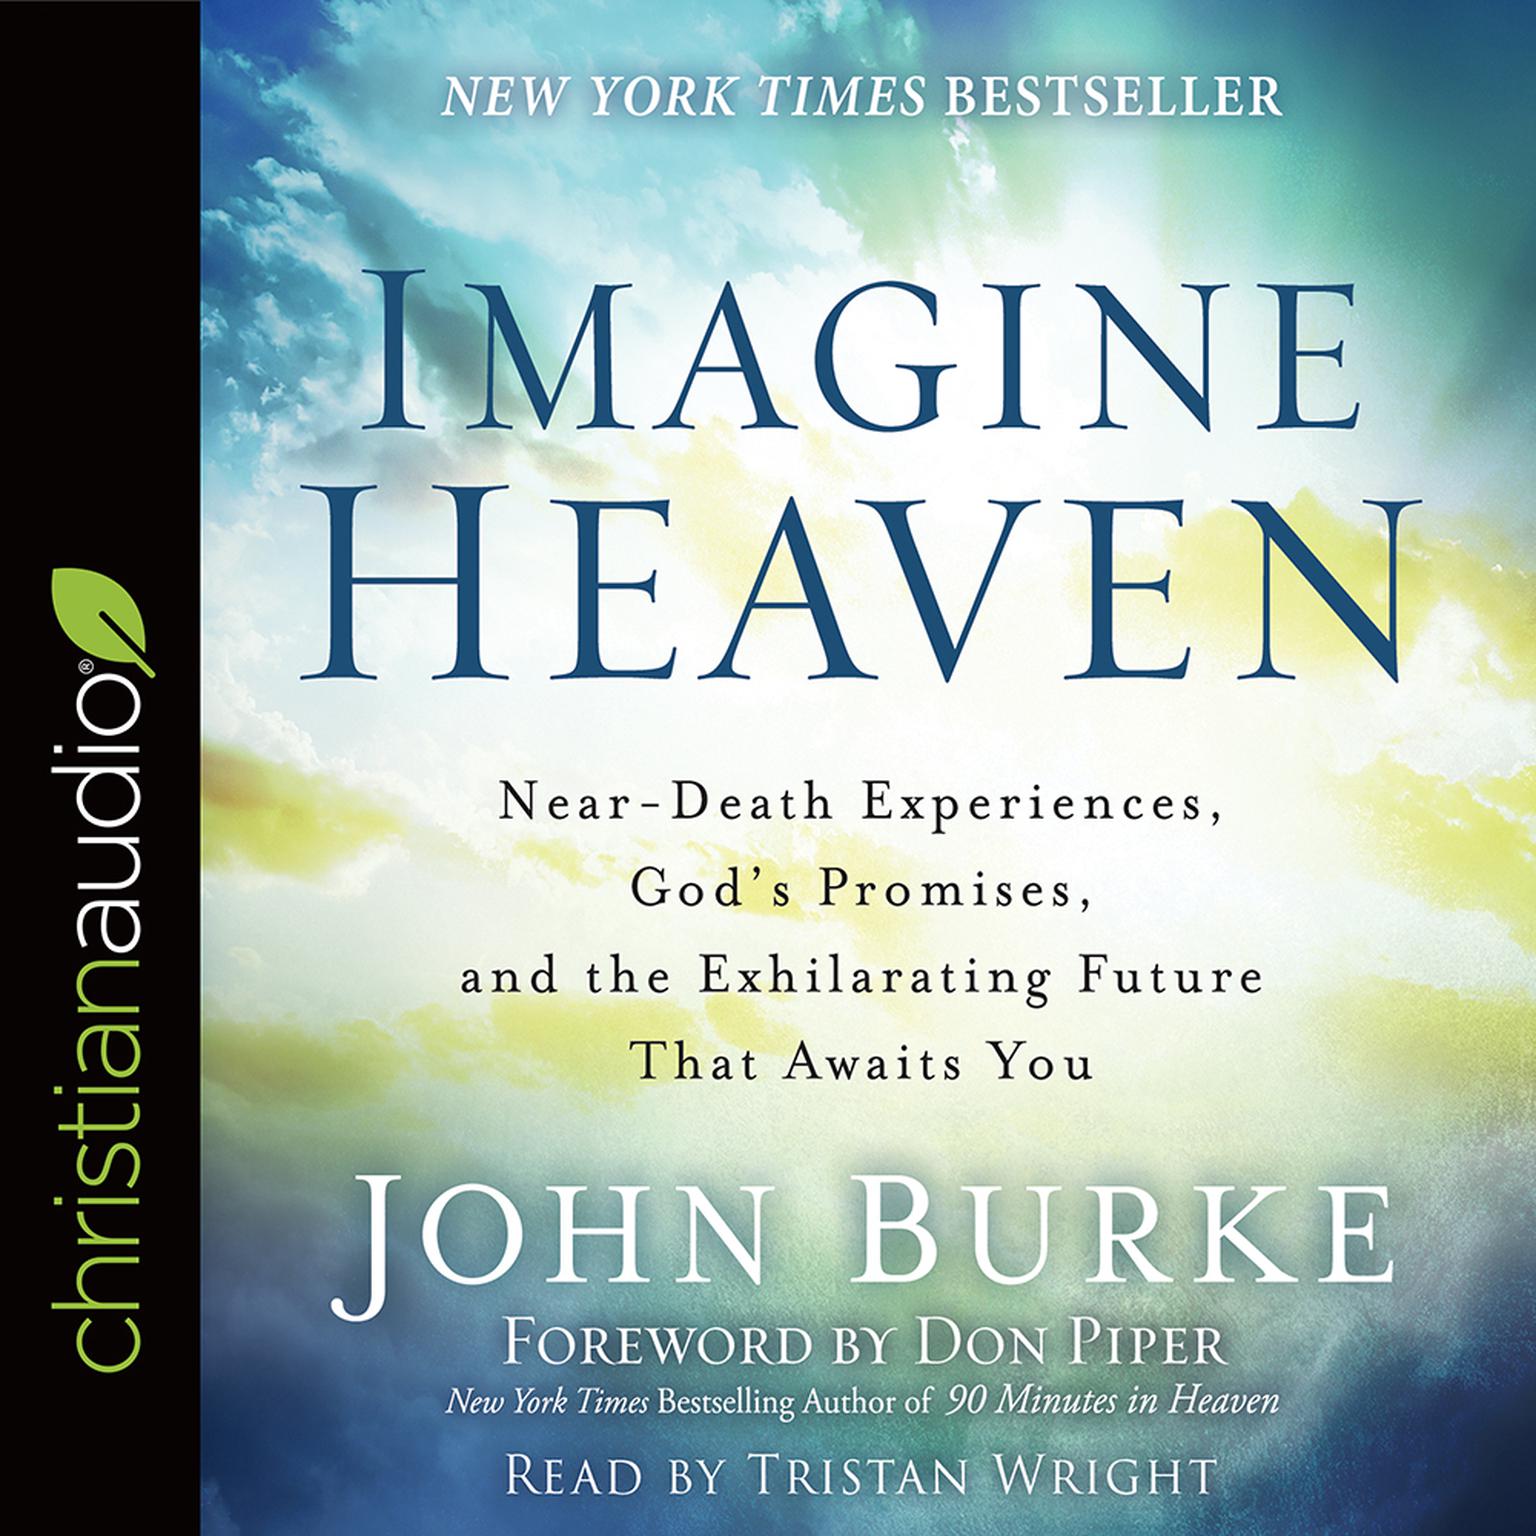 Imagine Heaven: Near-Death Experiences, Gods Promises, and the Exhilarating Future That Awaits You Audiobook, by John Burke